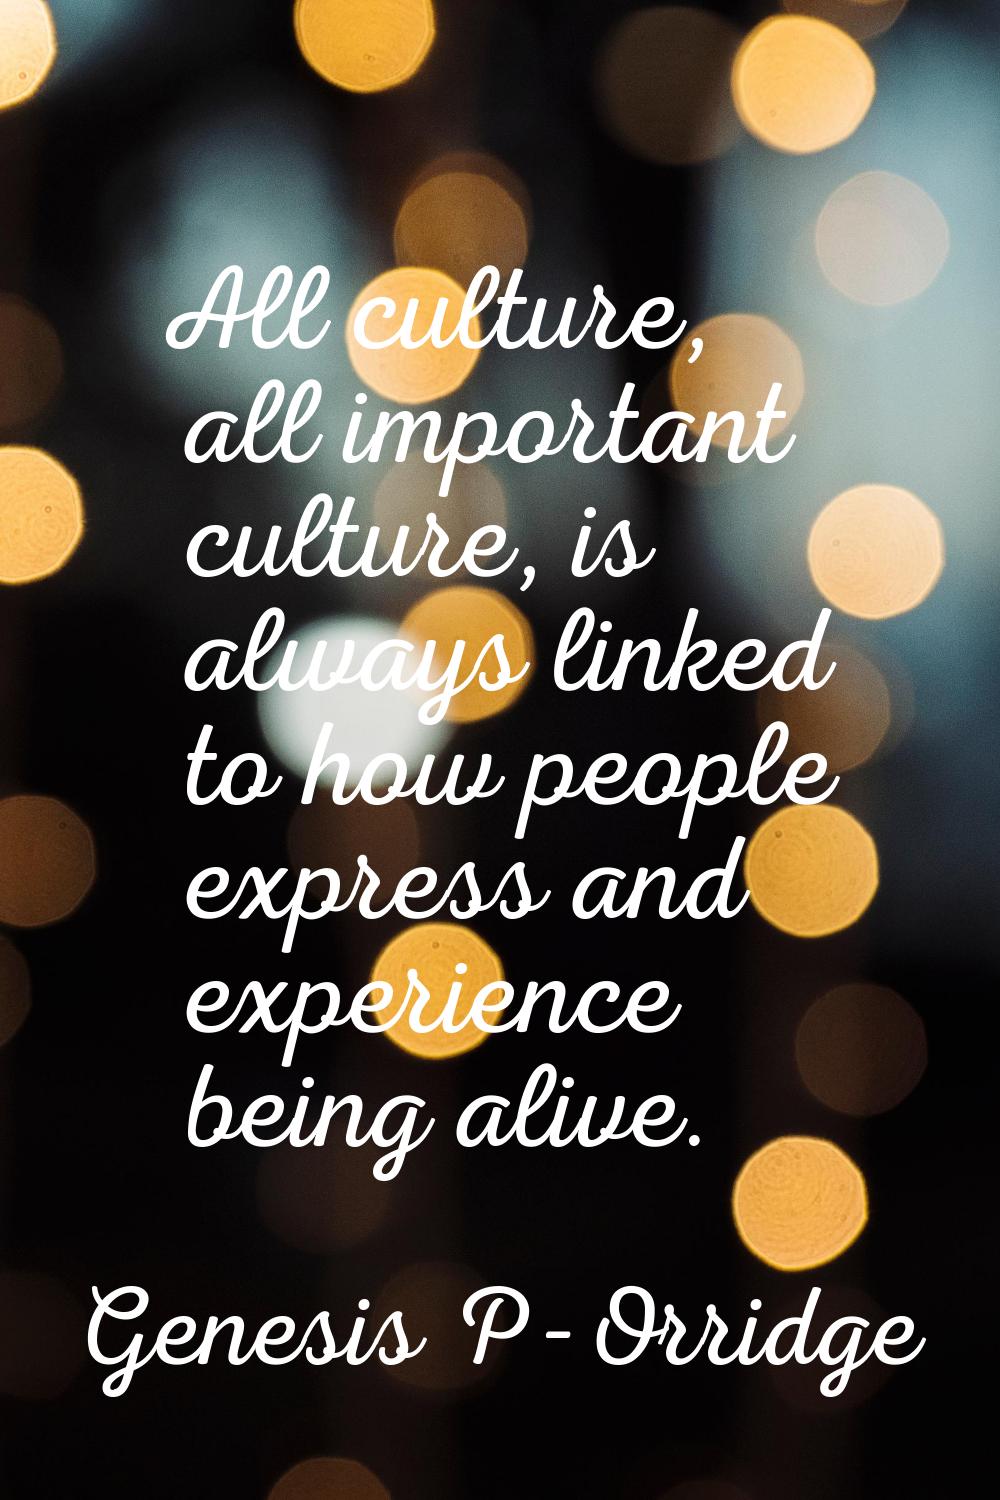 All culture, all important culture, is always linked to how people express and experience being ali